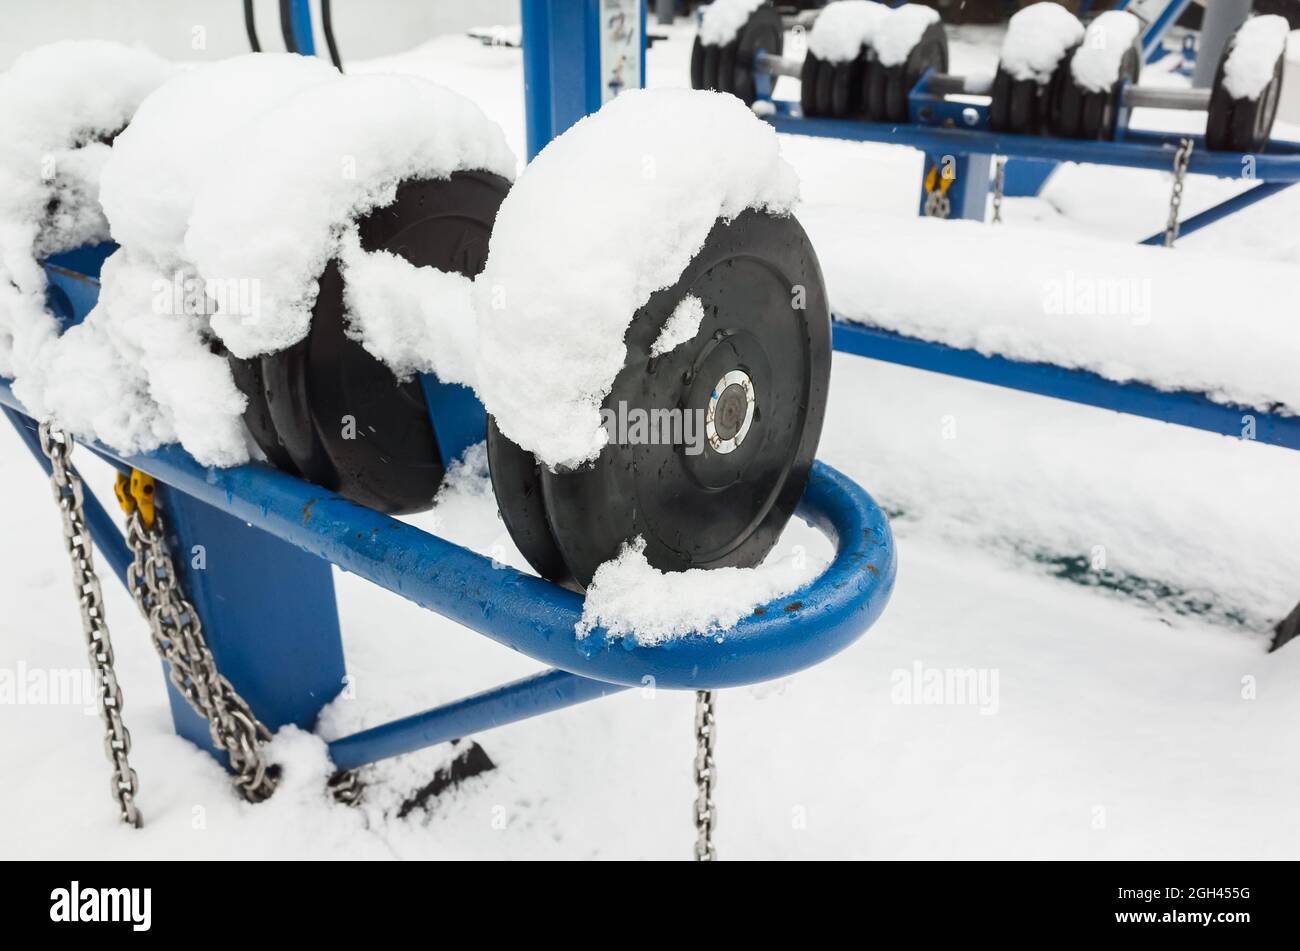 Dumbbells with snow, an outdoor gym equipment. Fitness zone of a public park open and free for visiting during all seasons Stock Photo